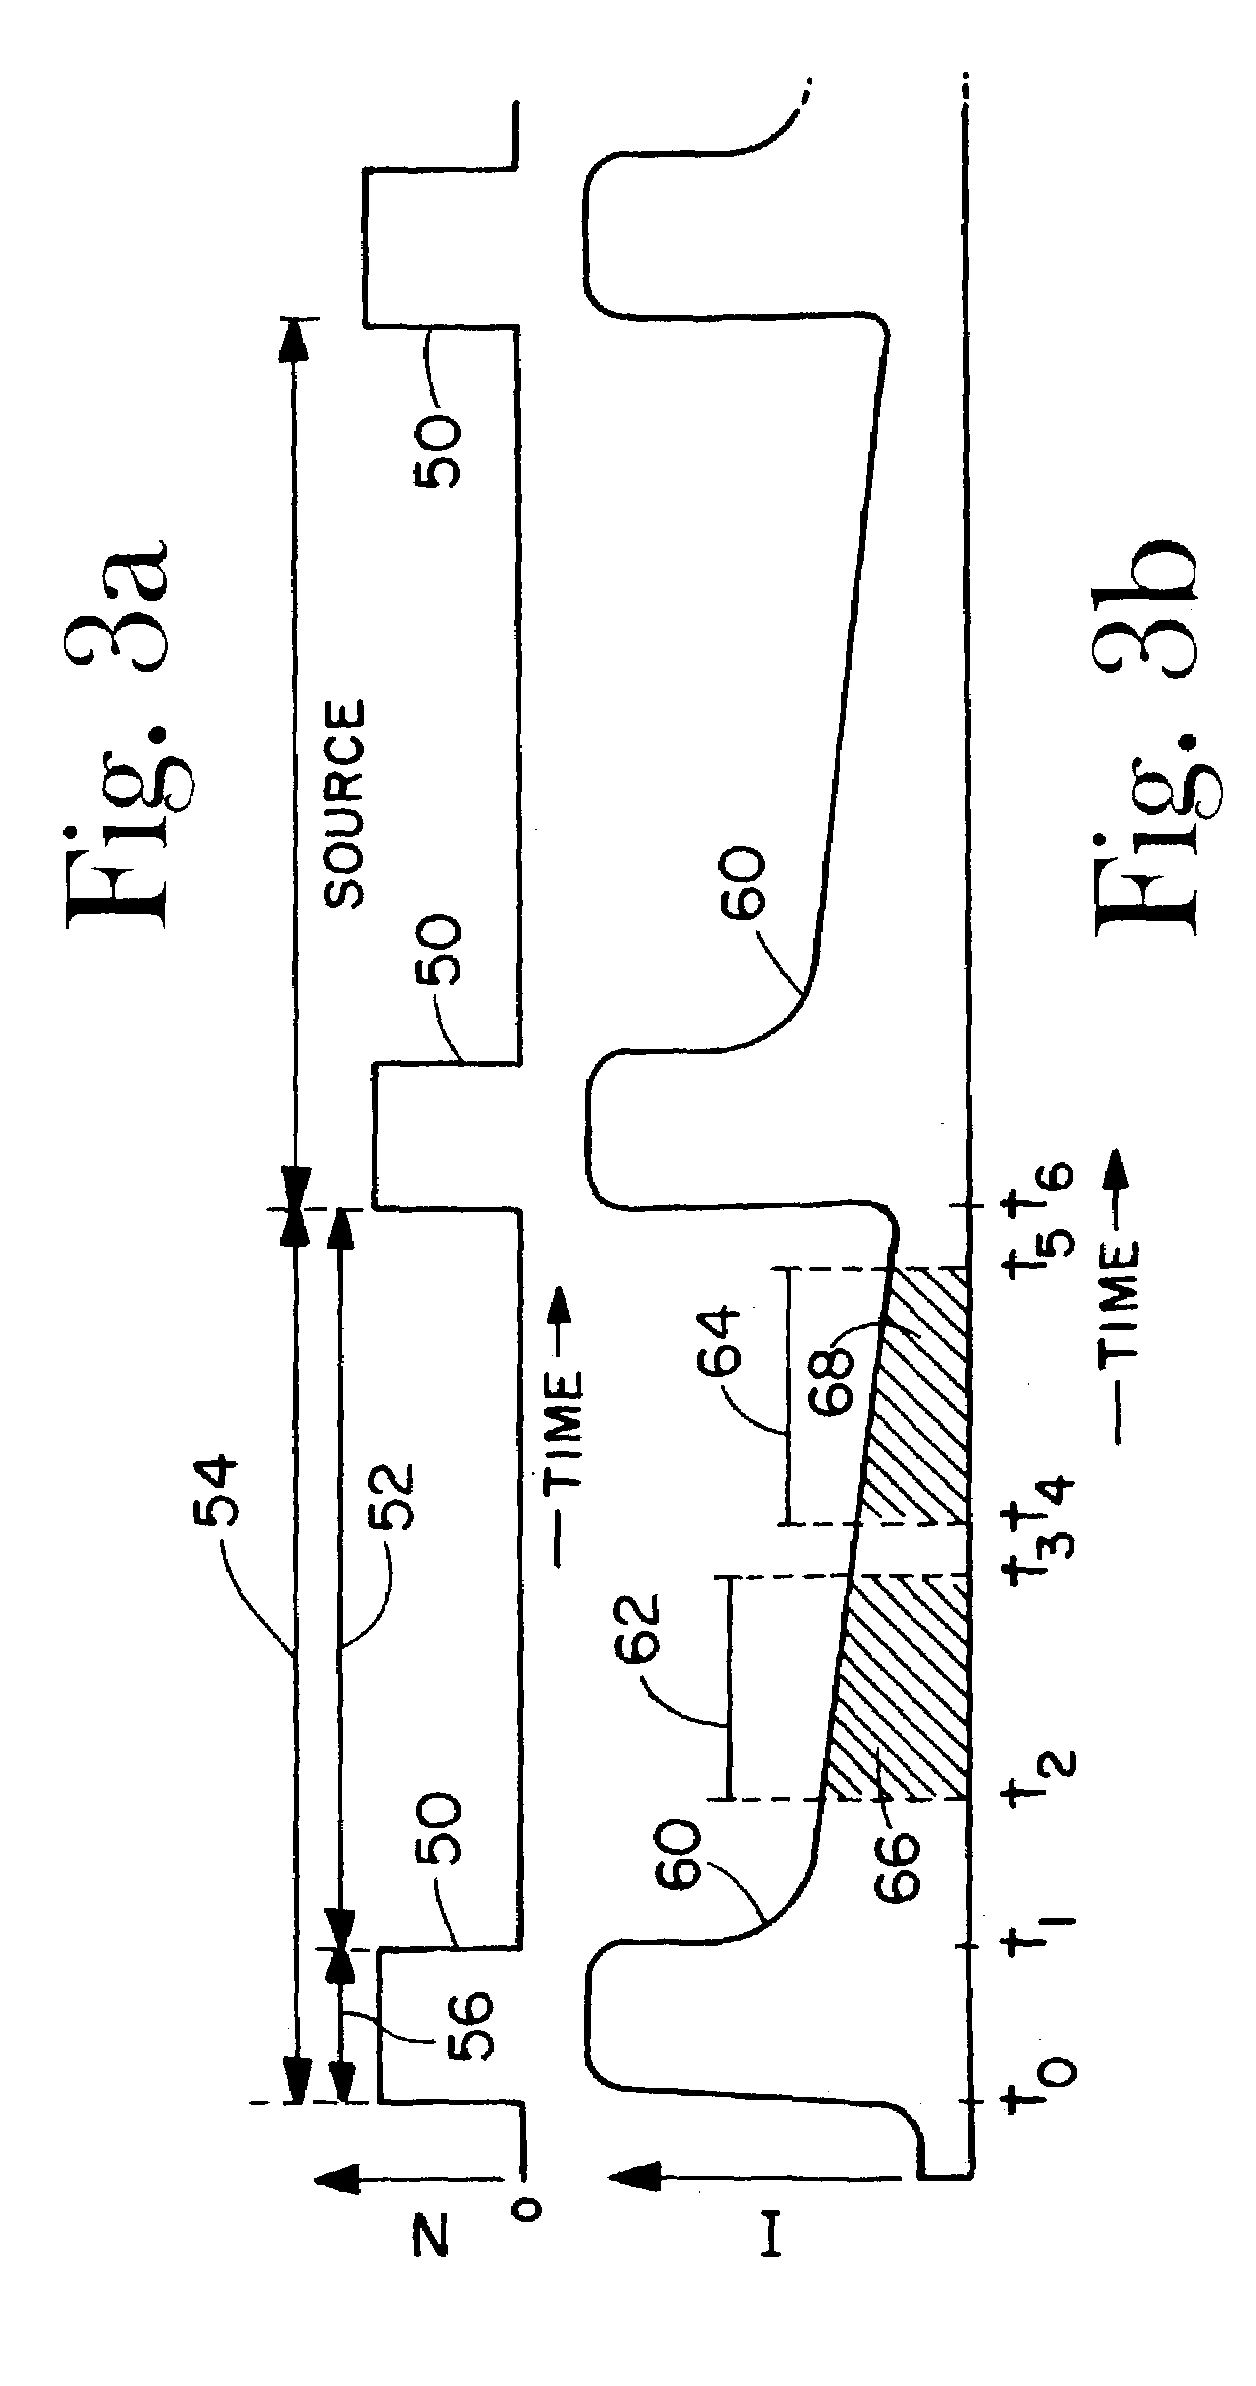 Method and apparatus for measuring radiation in a borehole